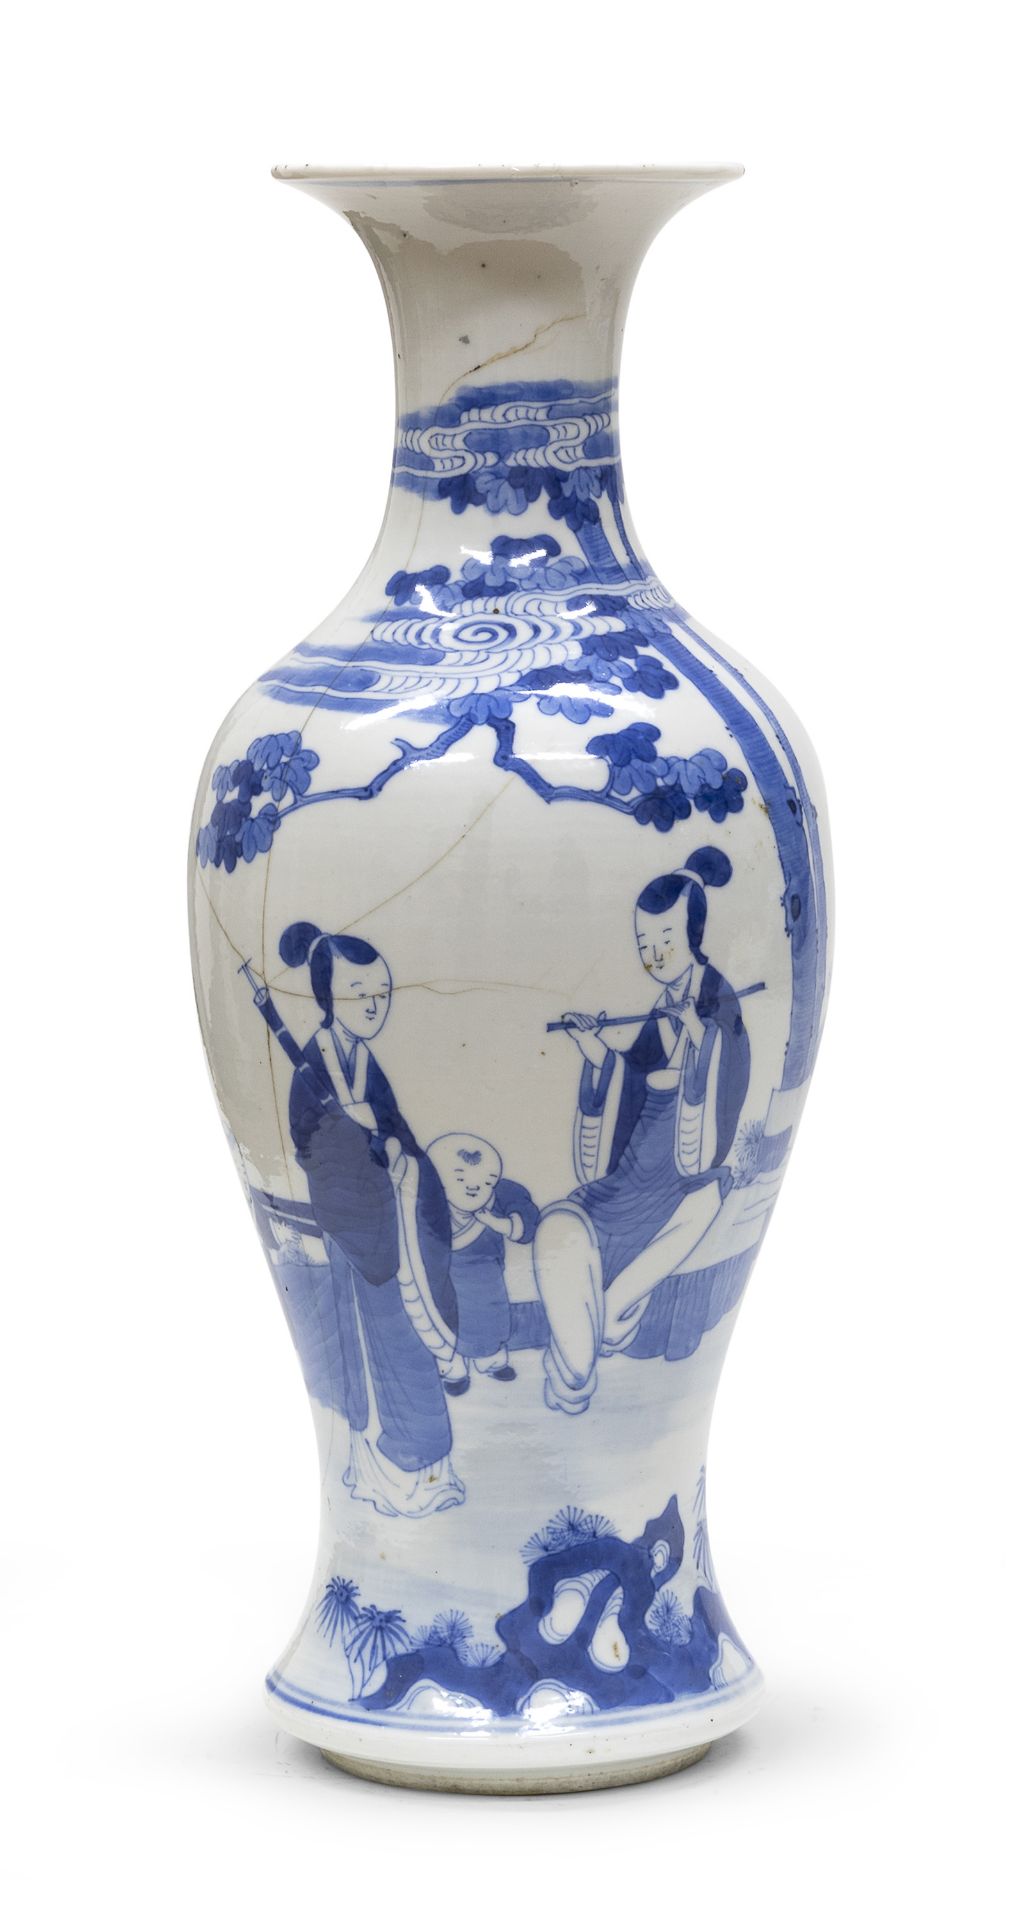 A CHINESE WHITE AND BLUE PORCELAIN VASE FIRST HALF 20TH CENTURY.